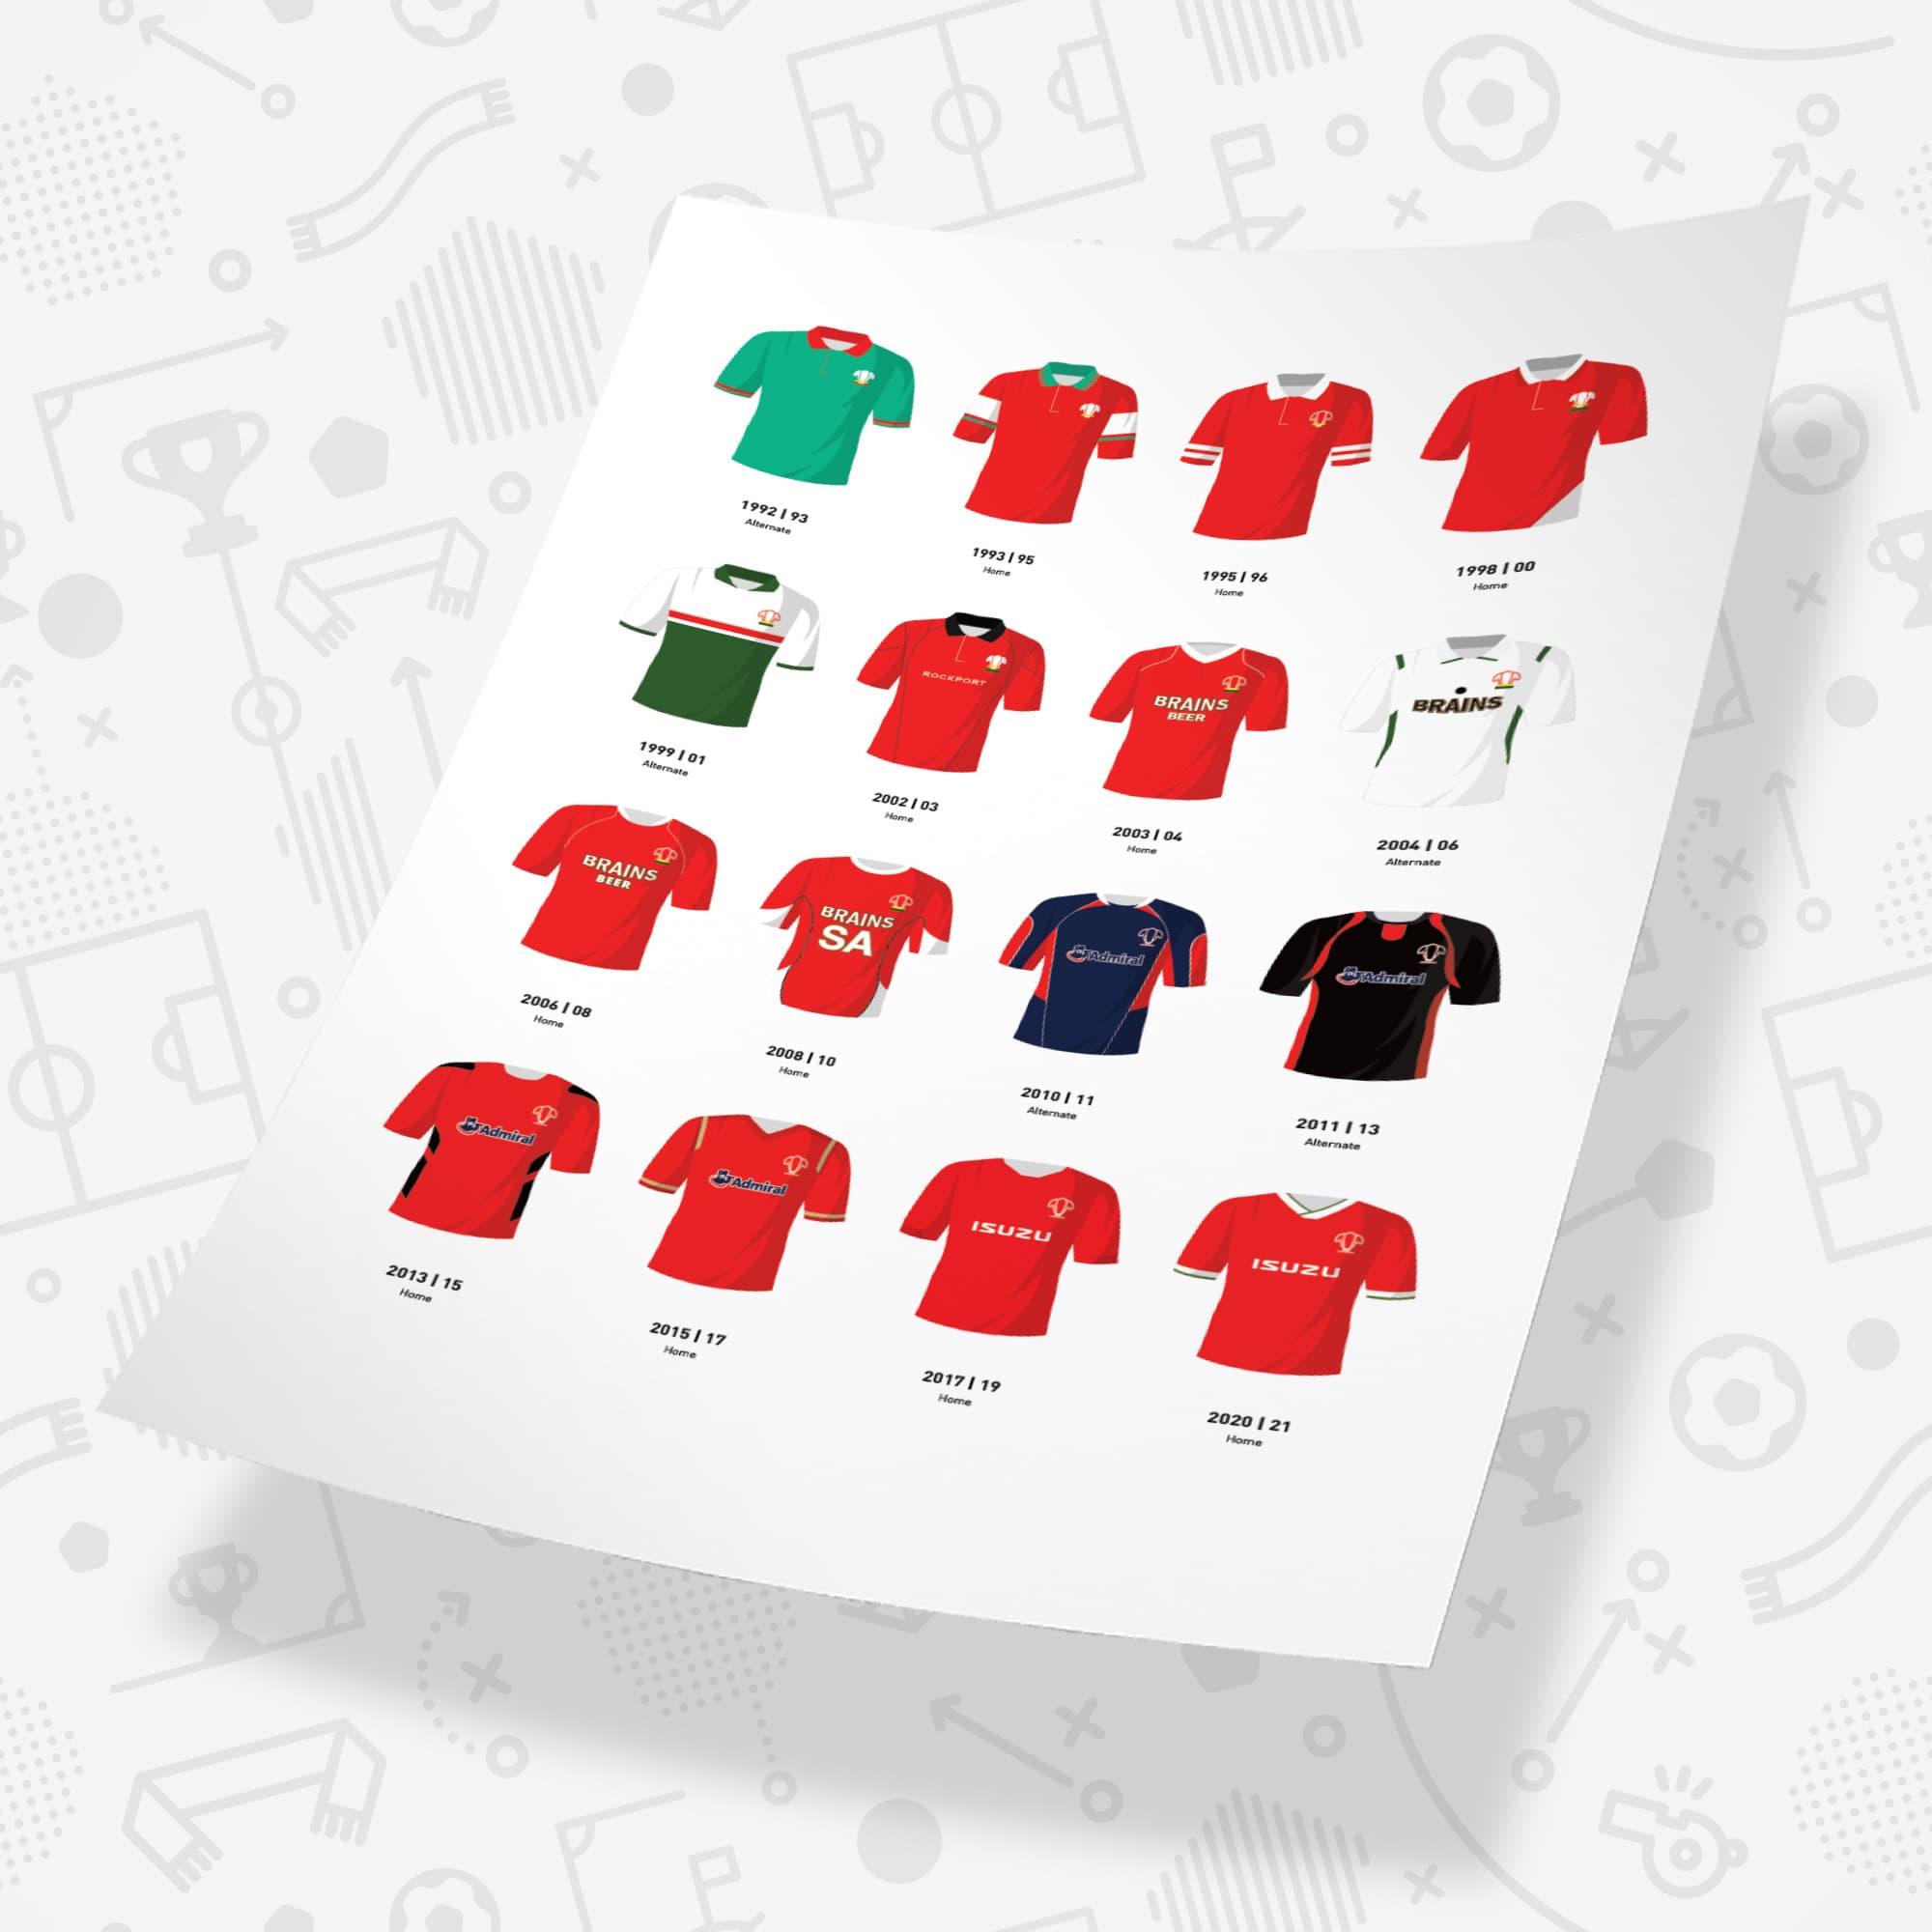 Wales Classic Kits Rugby Union Team Print